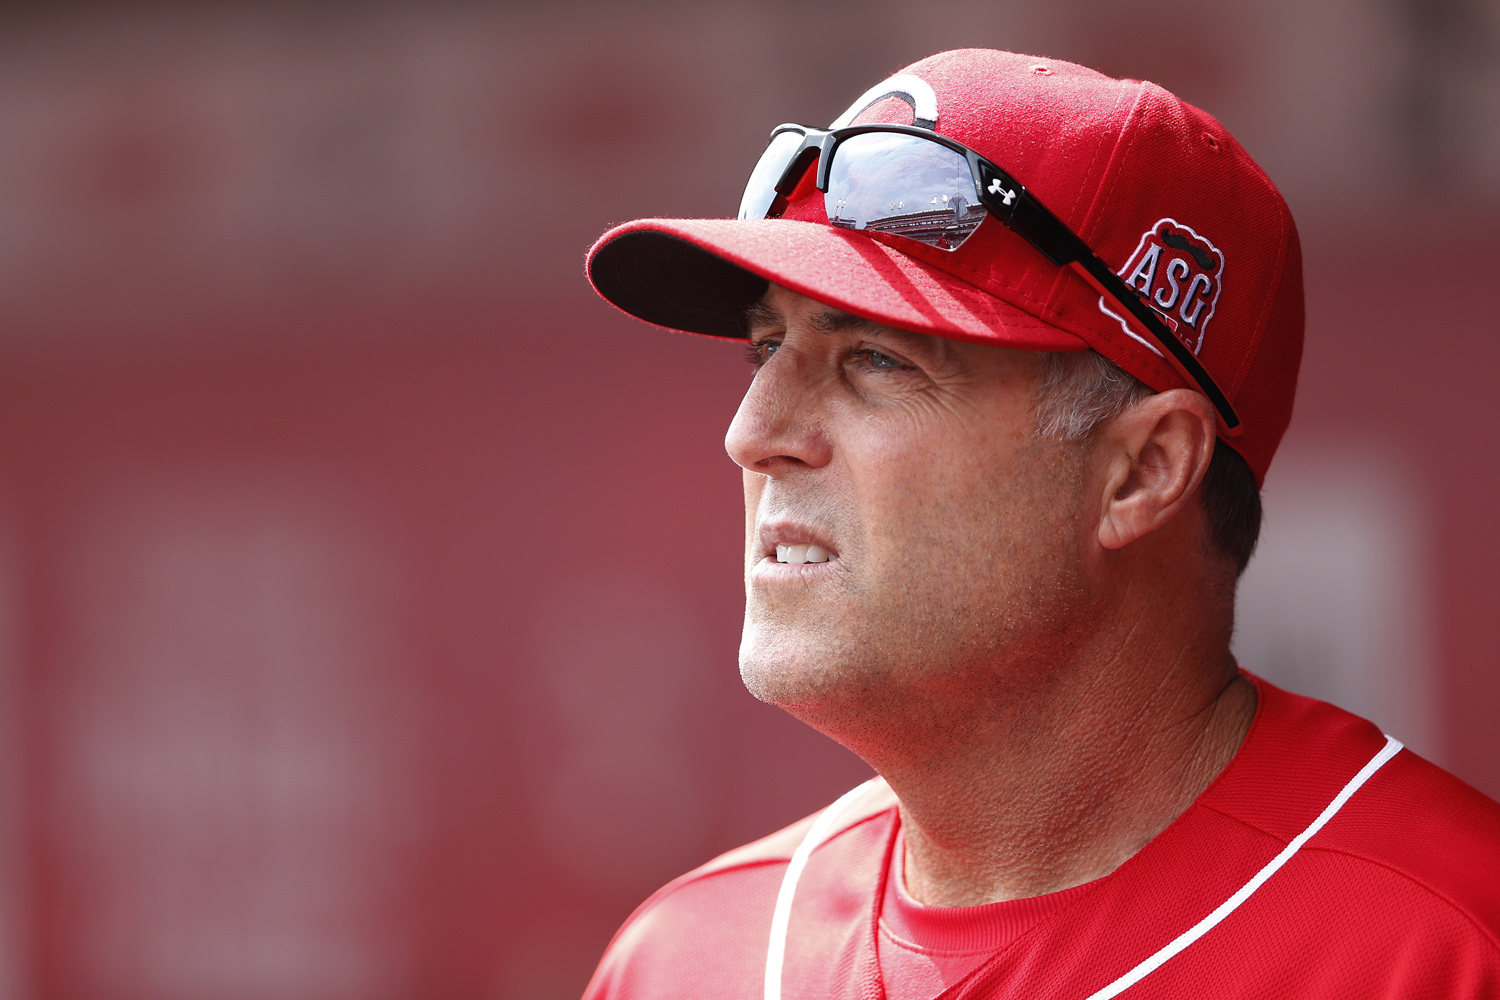 Cincinnati Reds manager Bryan Price looks on during the game against the Pittsburgh Pirates at Great American Ball Park on April 9, 2015 in Cincinnati, Ohio. (Joe Robbins — Getty Images)